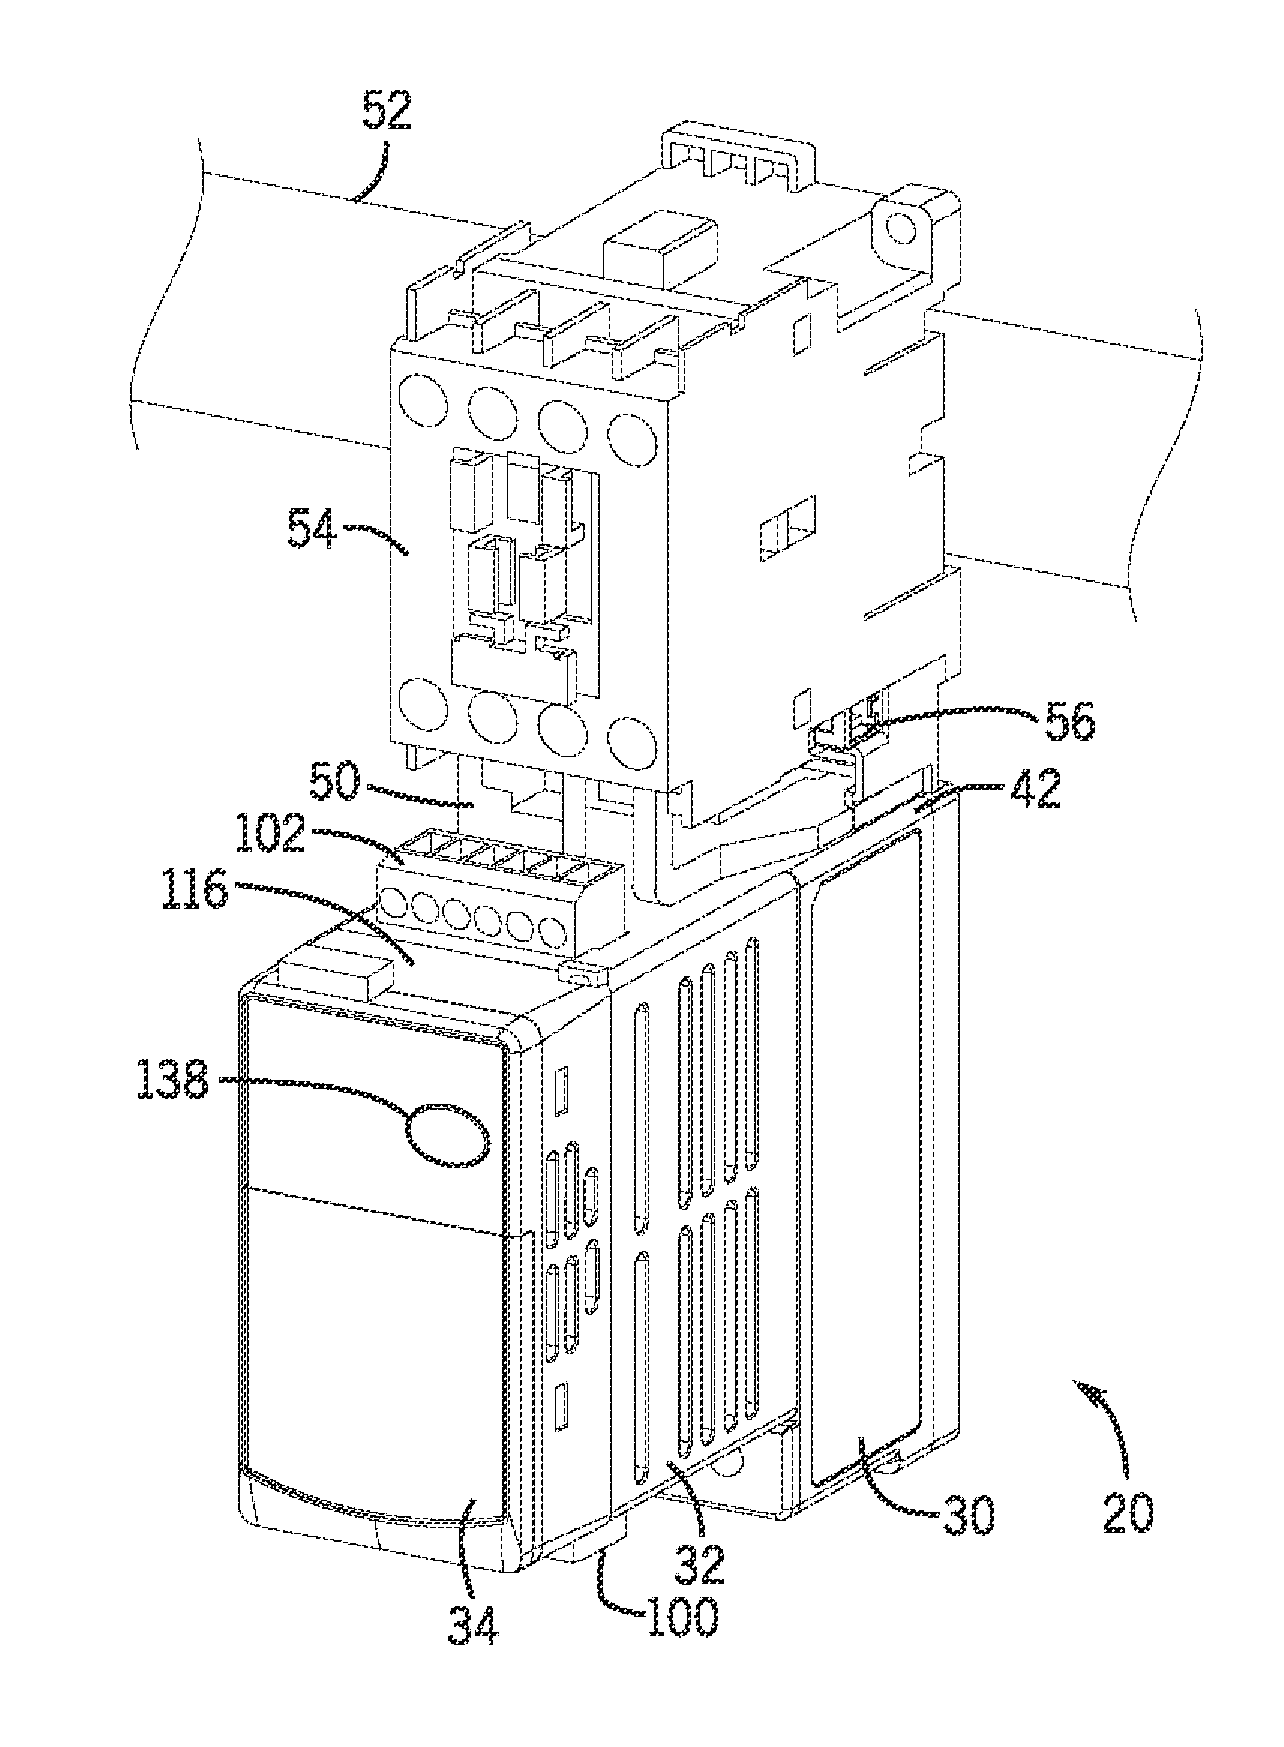 Modular Overload Relay Assembly With A Modular Communication And Human Interface Module